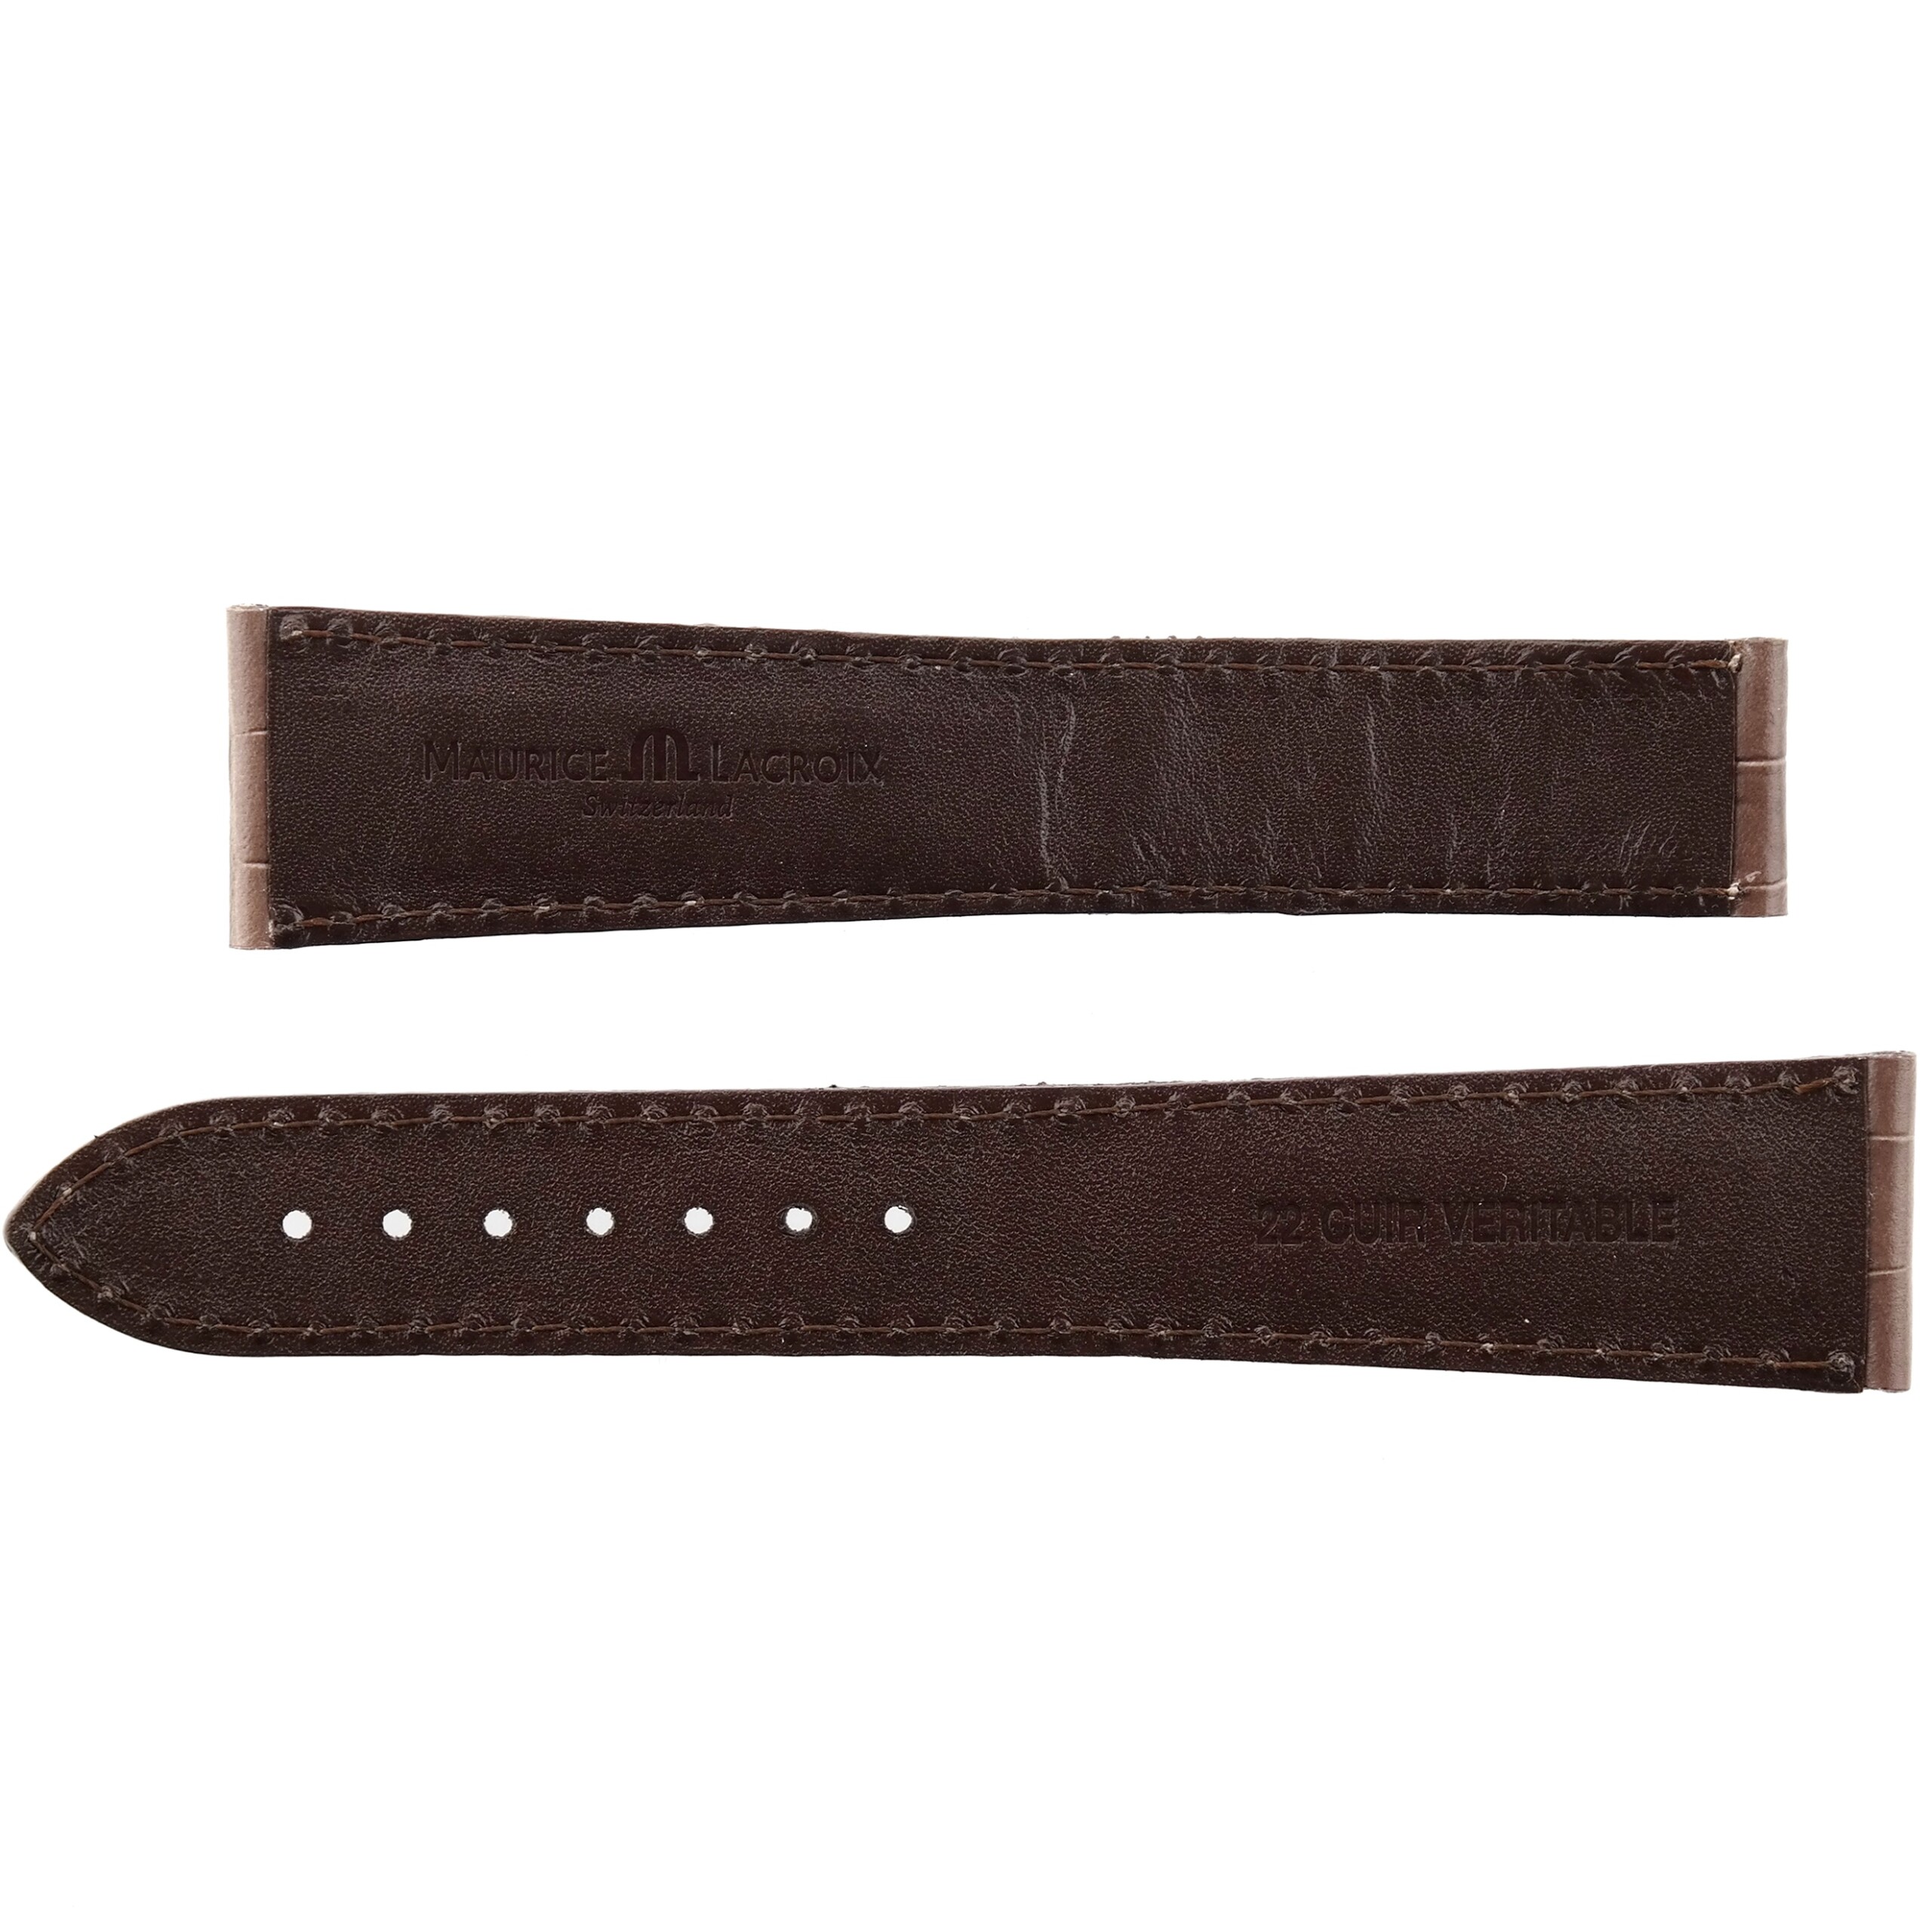 MAURICE LACROIX - Leather Watch Strap - 22/18 100/125 - Swiss Made - Brown - XL